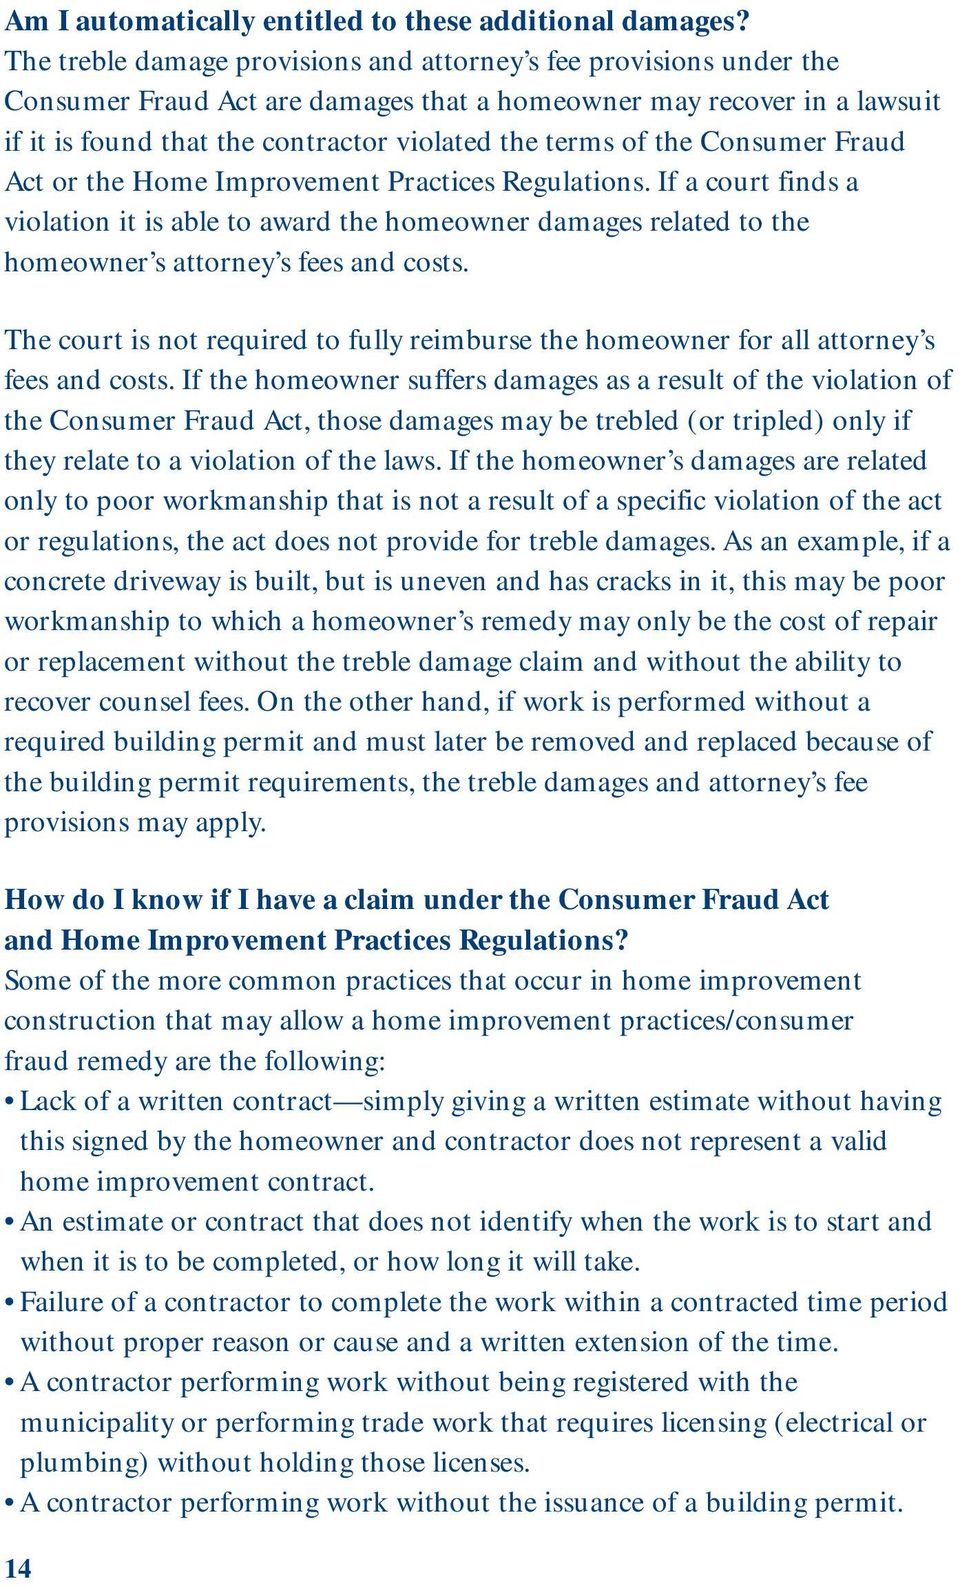 the Consumer Fraud Act or the Home Improvement Practices Regulations. If a court finds a violation it is able to award the homeowner damages related to the homeowner s attorney s fees and costs.